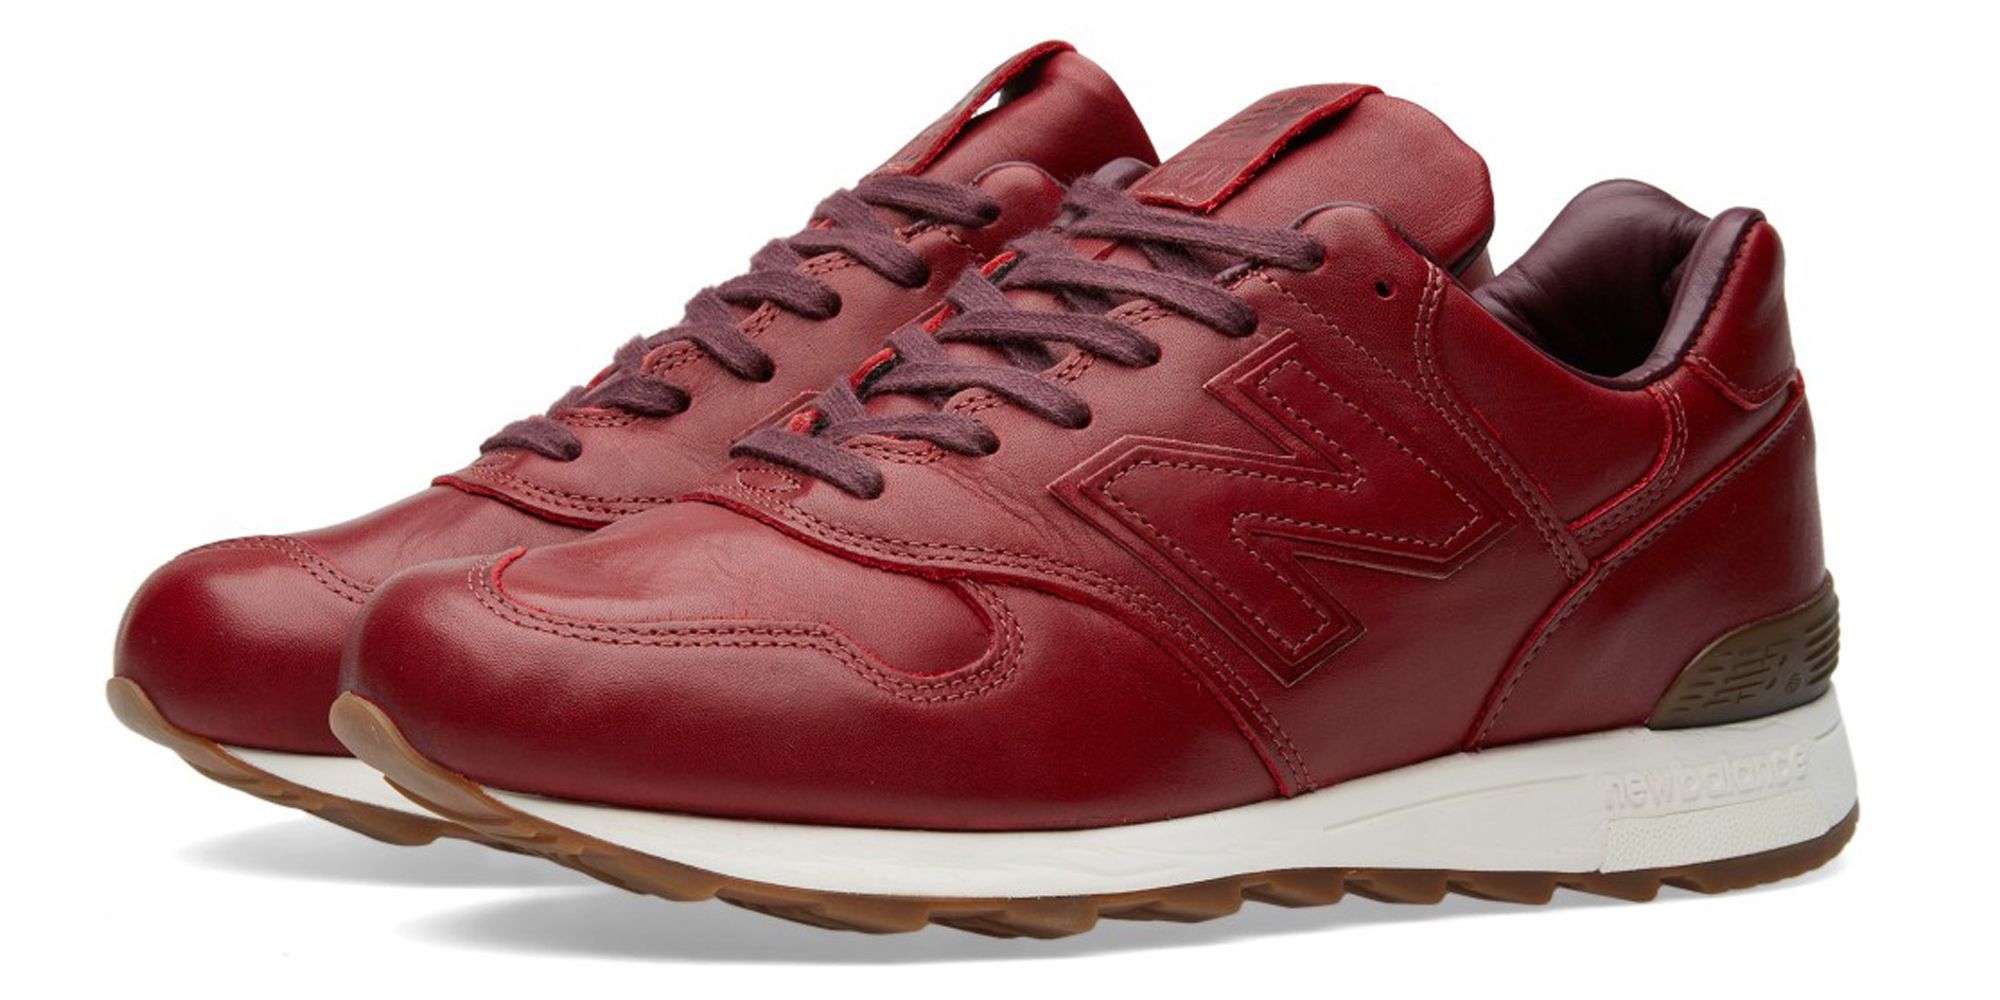 New Balance x Horween M1400BR Sneakers